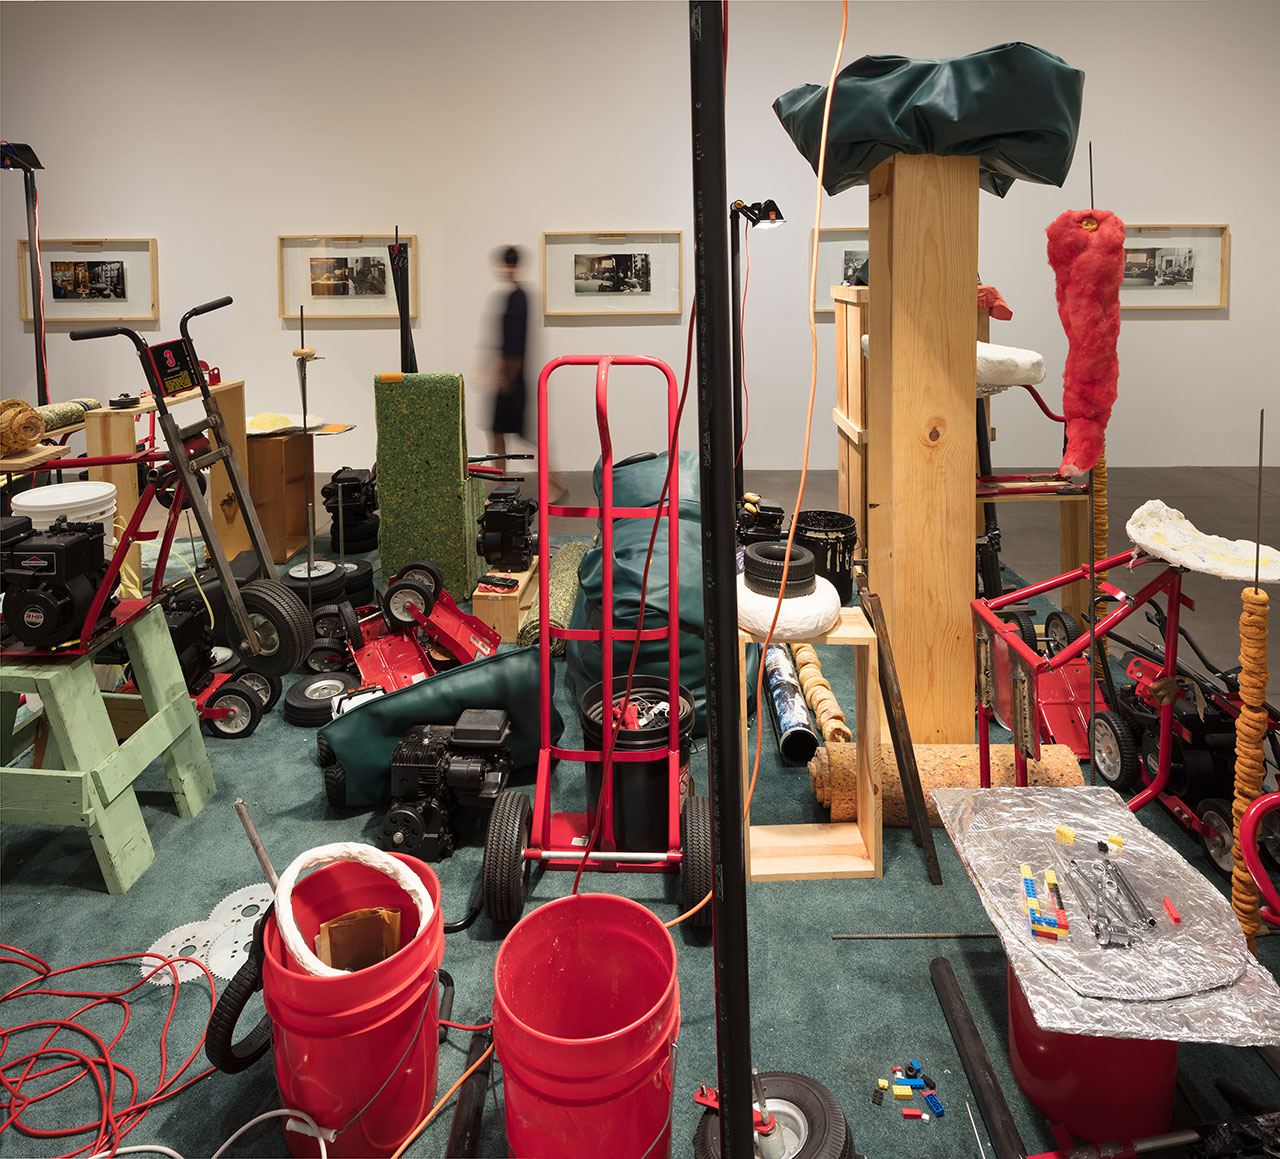 Jason Rhoades, My Brother / Brancuzi, 1995. Mixed media. Dimensions variable. Installation view, ‘Jason Rhoades. Installations, 1994 – 2006’. Hauser &amp; Wirth Los Angeles, 2017 © The Estate of Jason Rhoades. Courtesy Private Collection, Switzerland. Photo by Fredrik Nilsen.